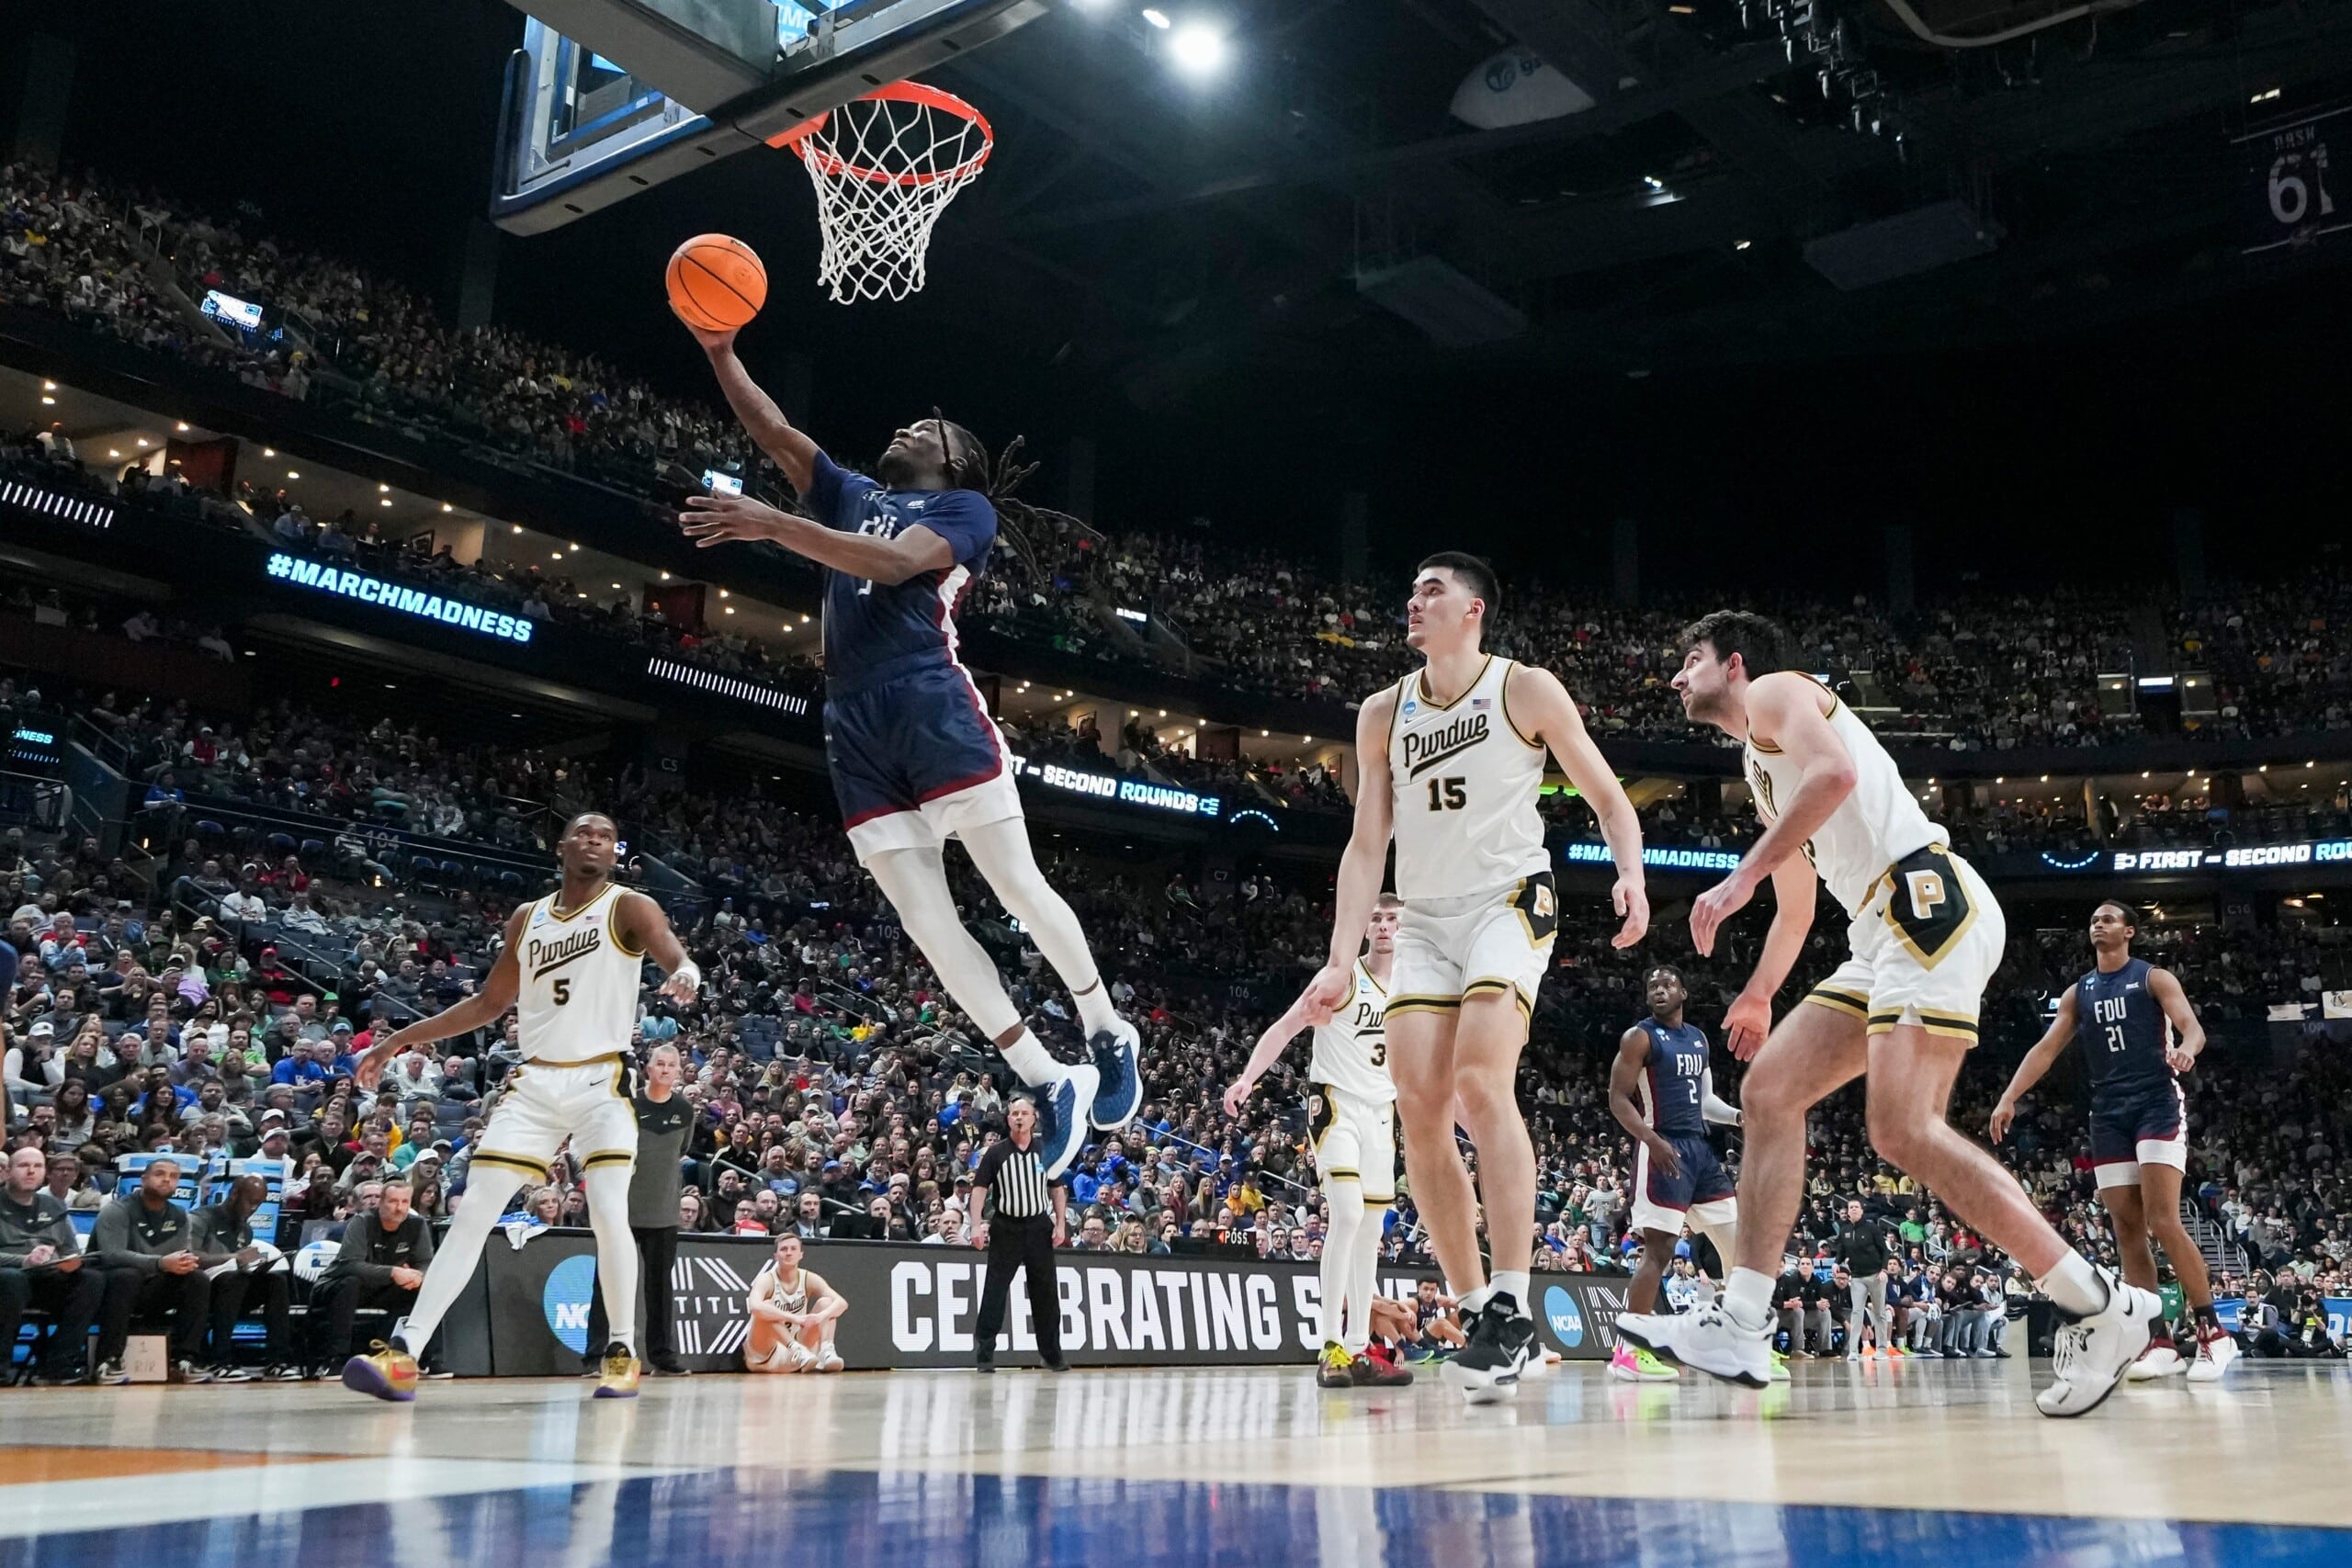 Mar 17, 2023; Columbus, Ohio, USA; Fairleigh Dickinson Knights guard Heru Bligen (3) makes a layup in front of Purdue Boilermakers center Zach Edey (15) during the first round of the NCAA men’s basketball tournament at Nationwide Arena.